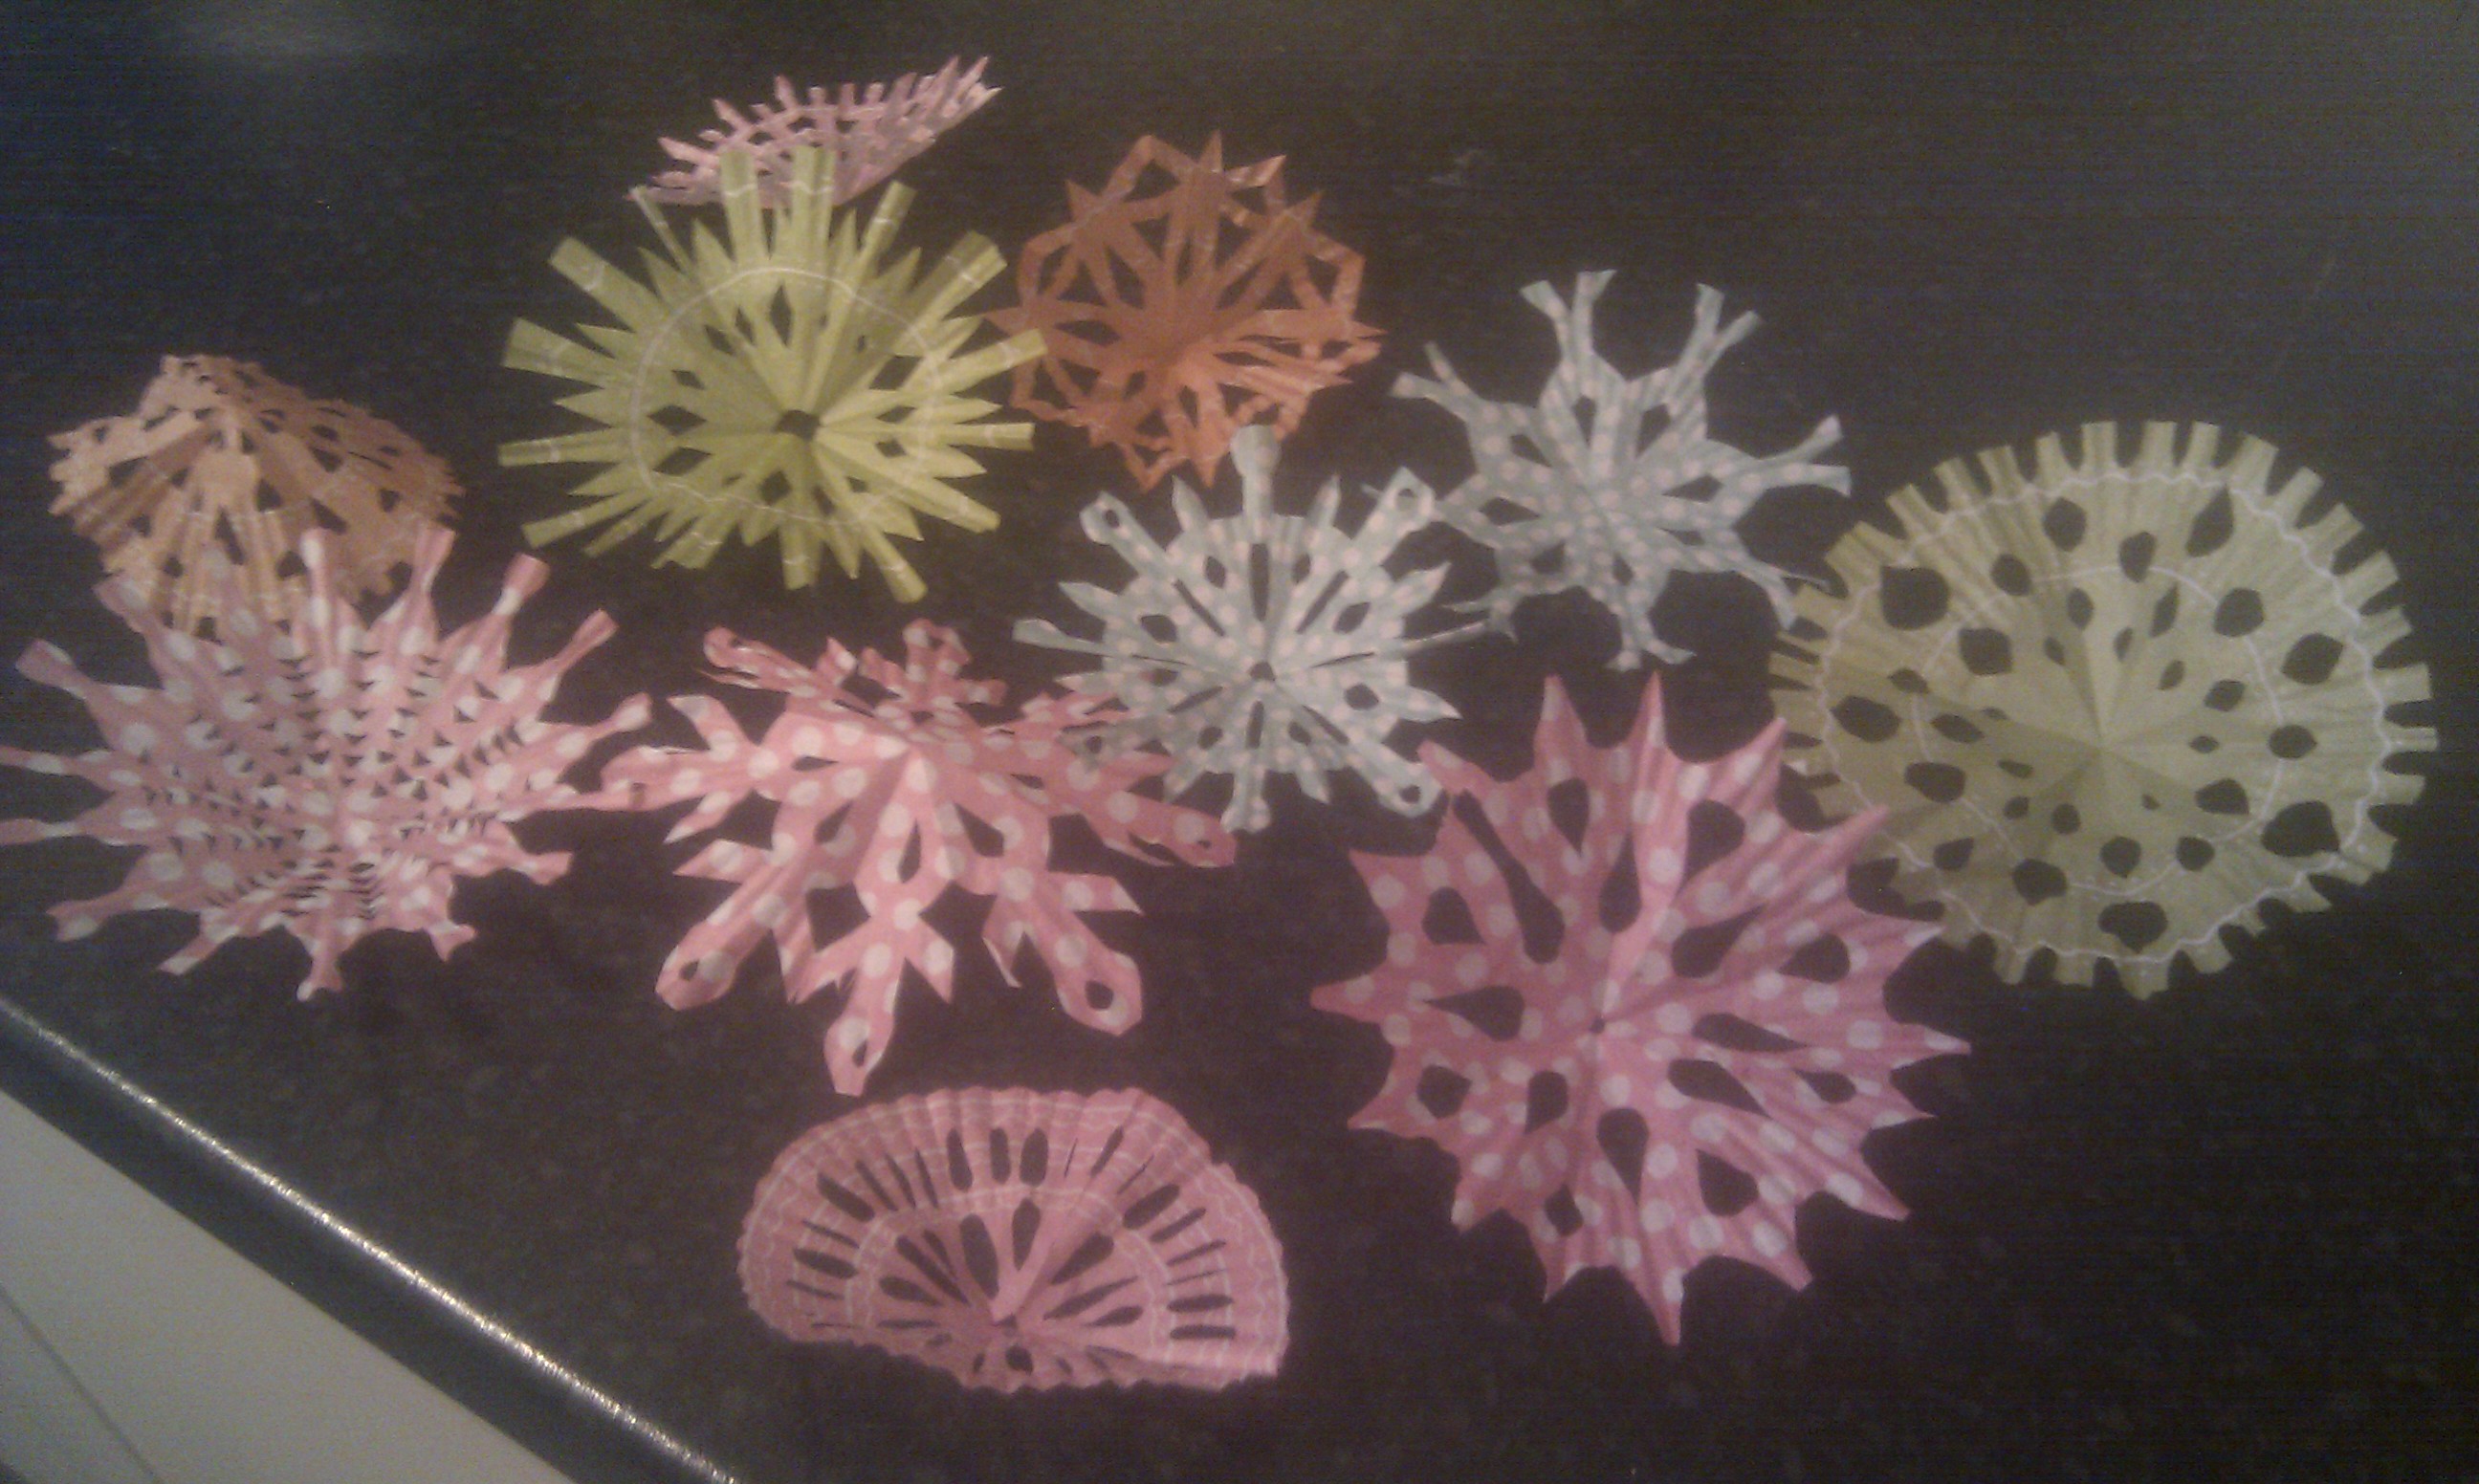 Making snowflakes from cupcake liners